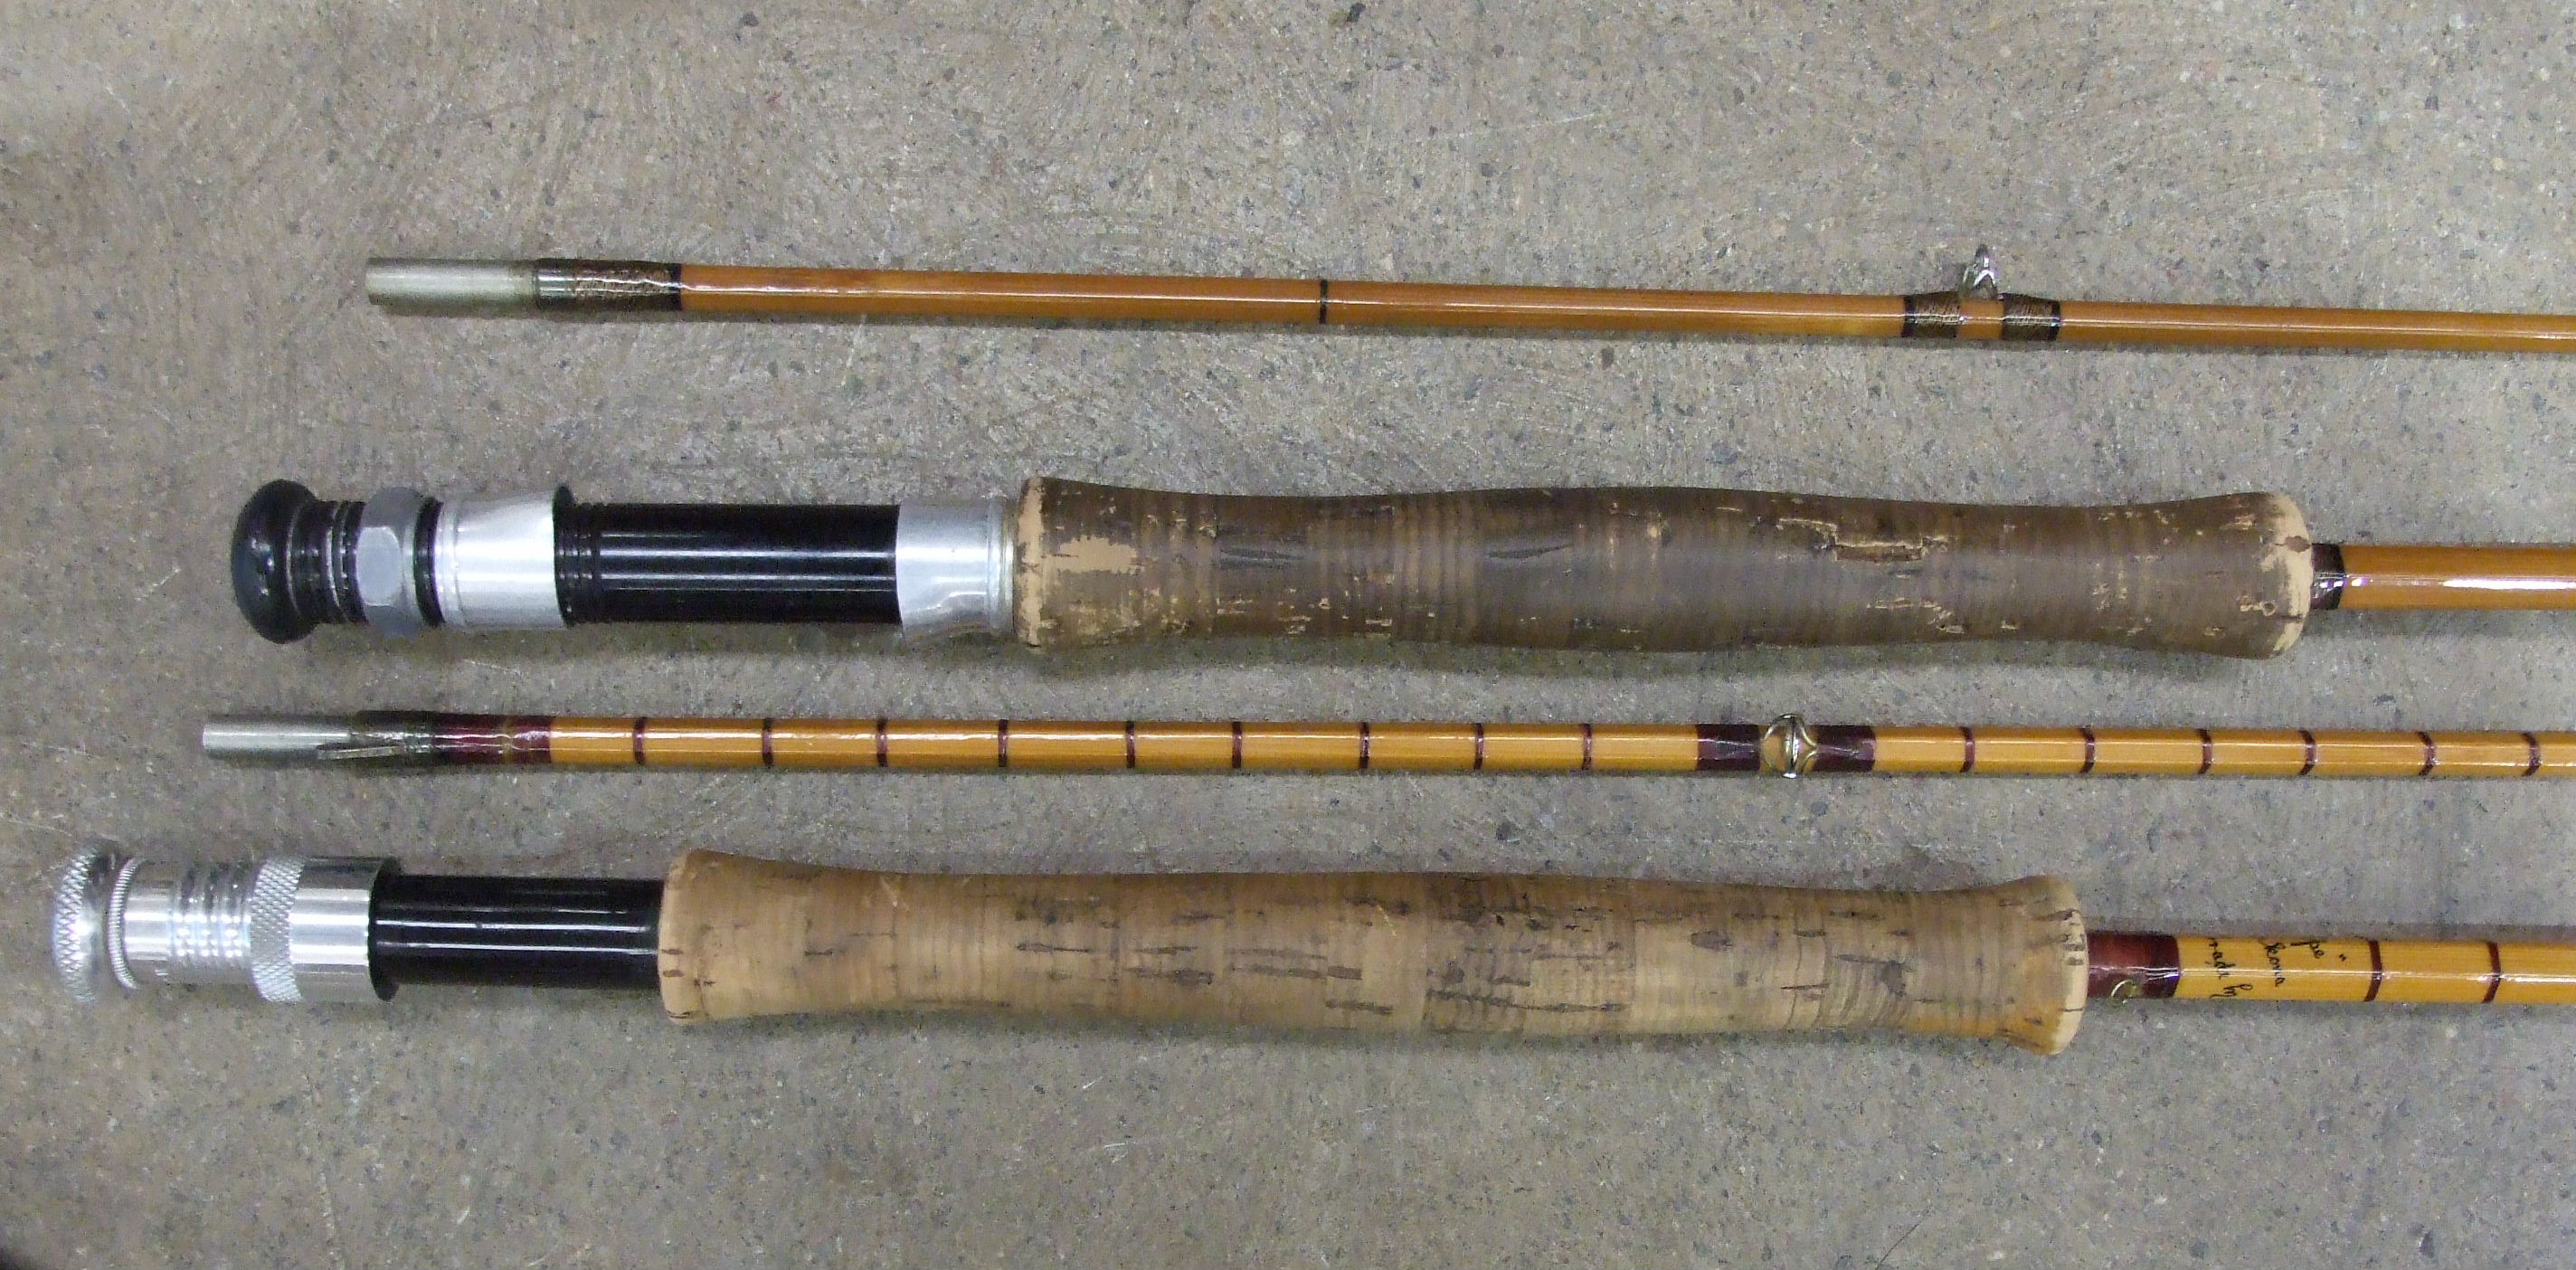 A Hardy's 10' two-piece split-cane trout fly rod "The Pope", with alloy reel fittings and integral